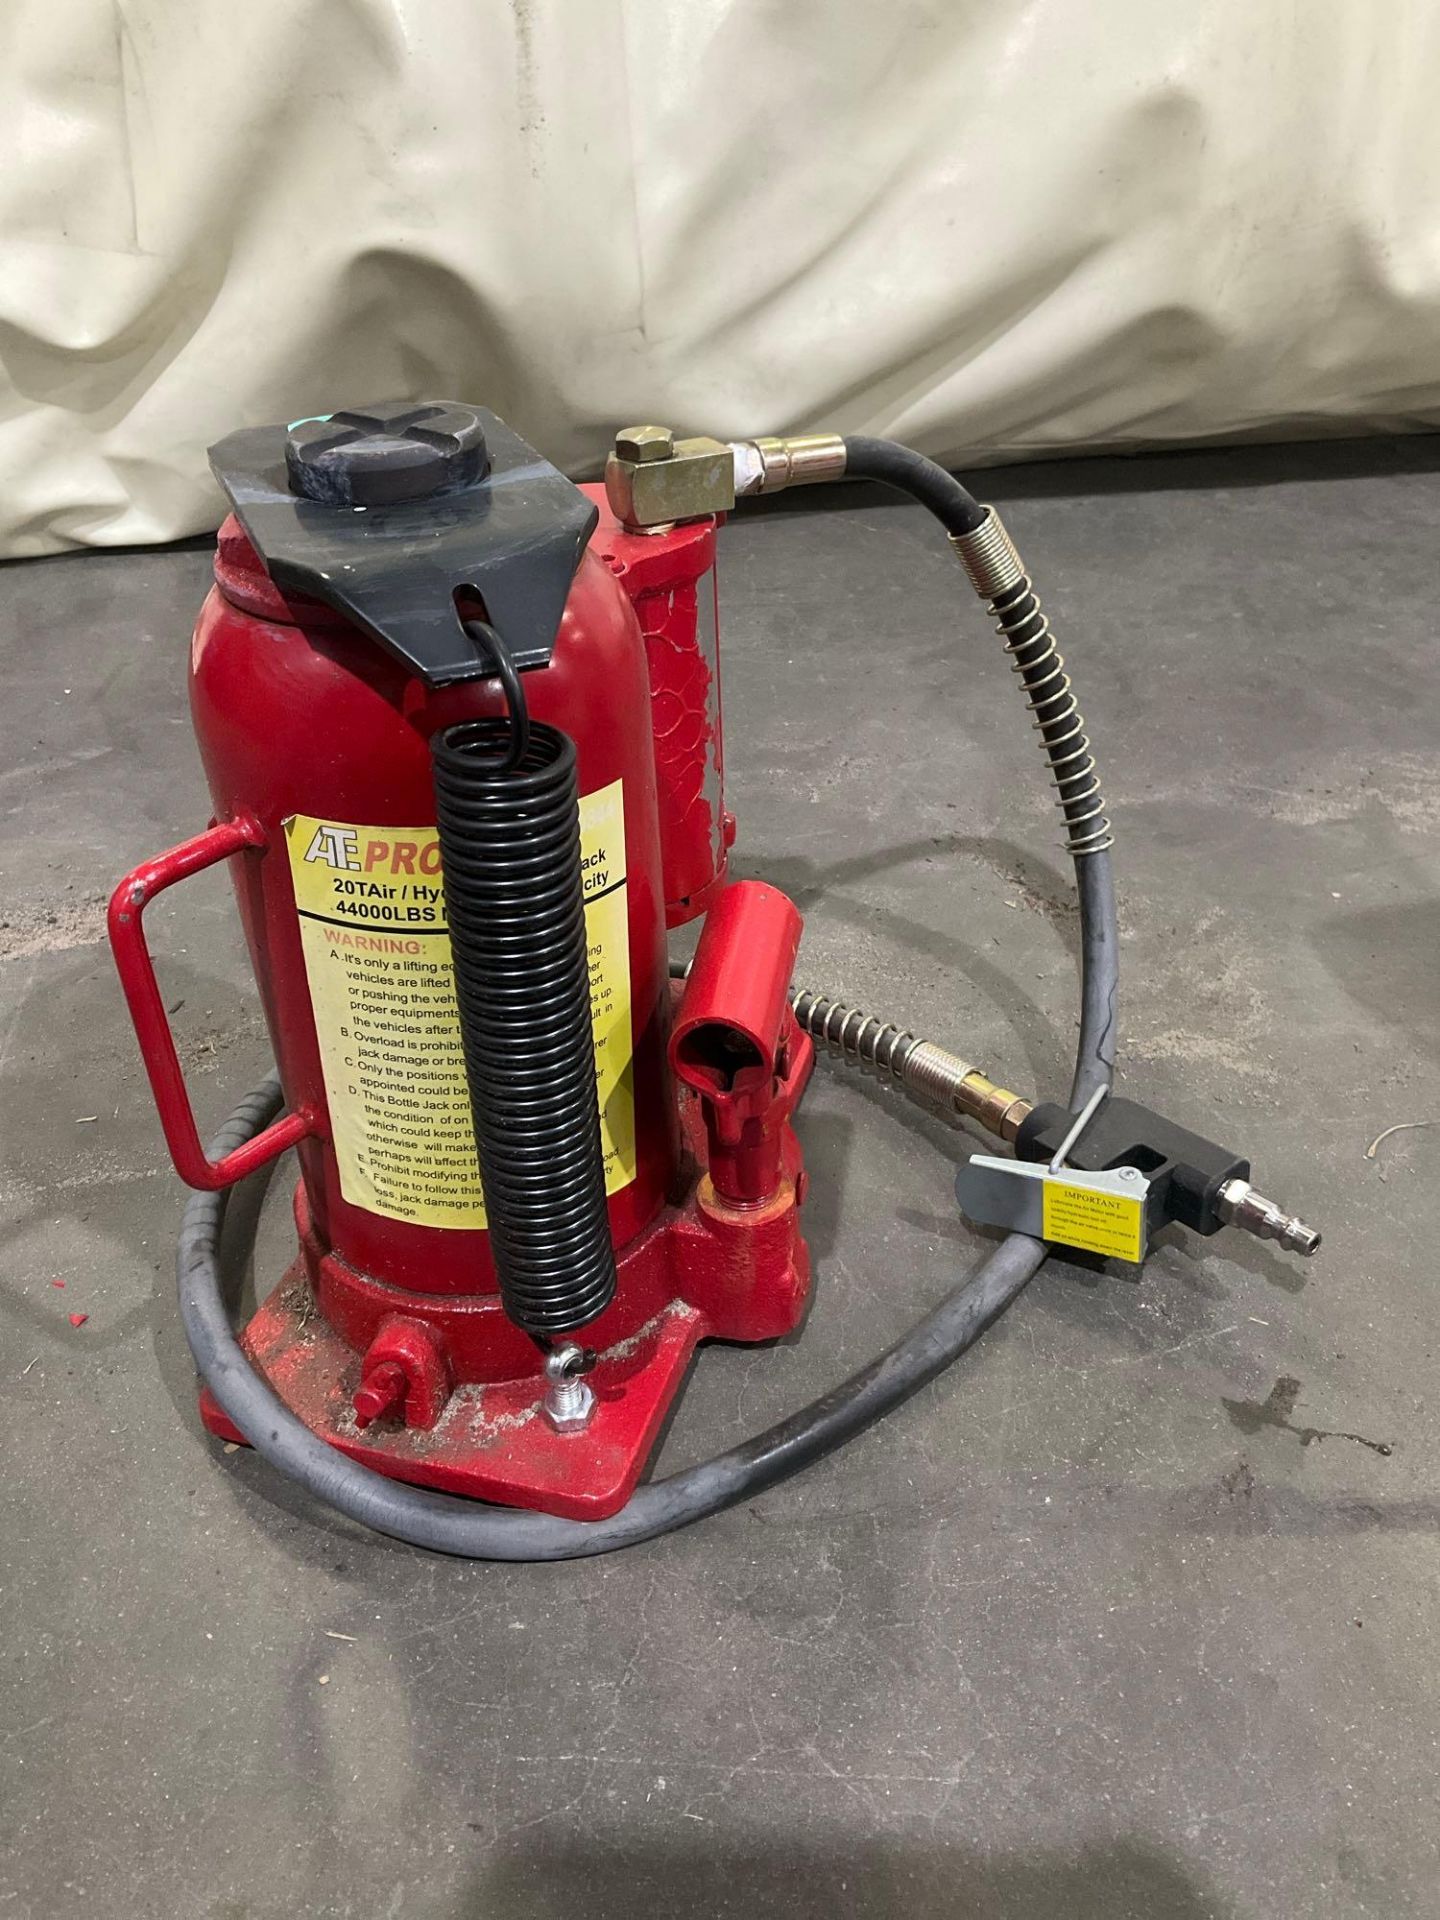 UNUSED ATE PRO USA 20 TON AIR HYDRAULIC BOTTLE JACK, APPROX 44,000LBS MAX CAPACITY - Image 2 of 6